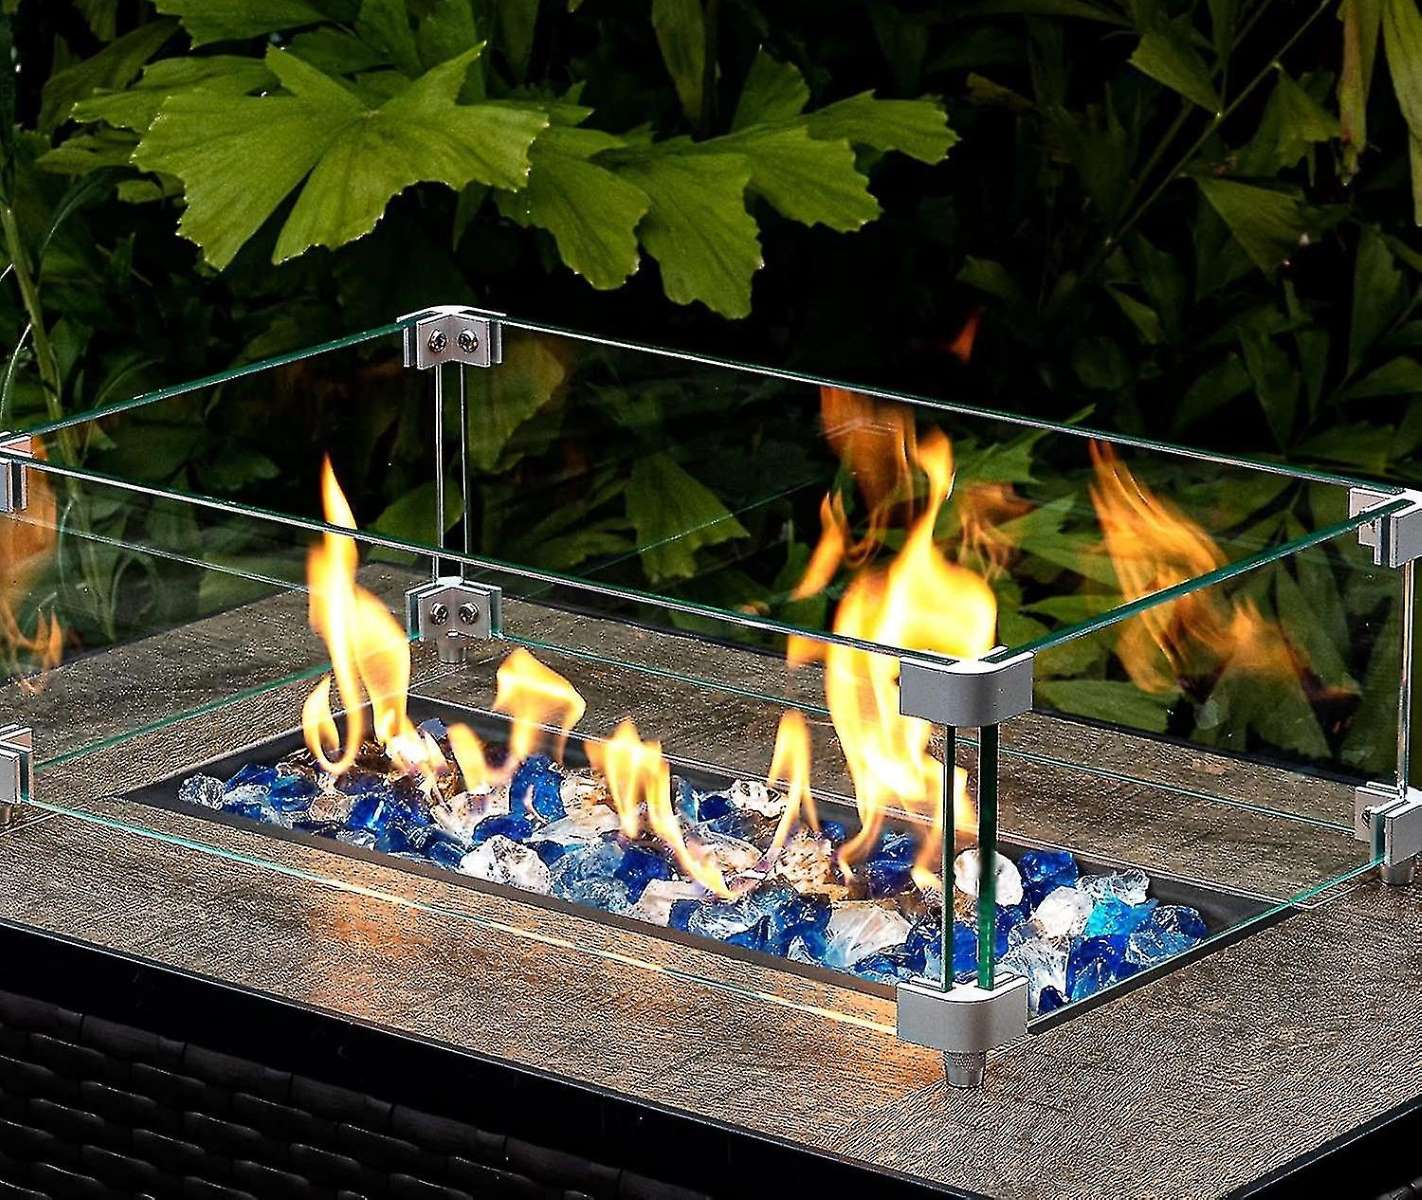 How To Place Glass Rocks In Propane Fire Pit